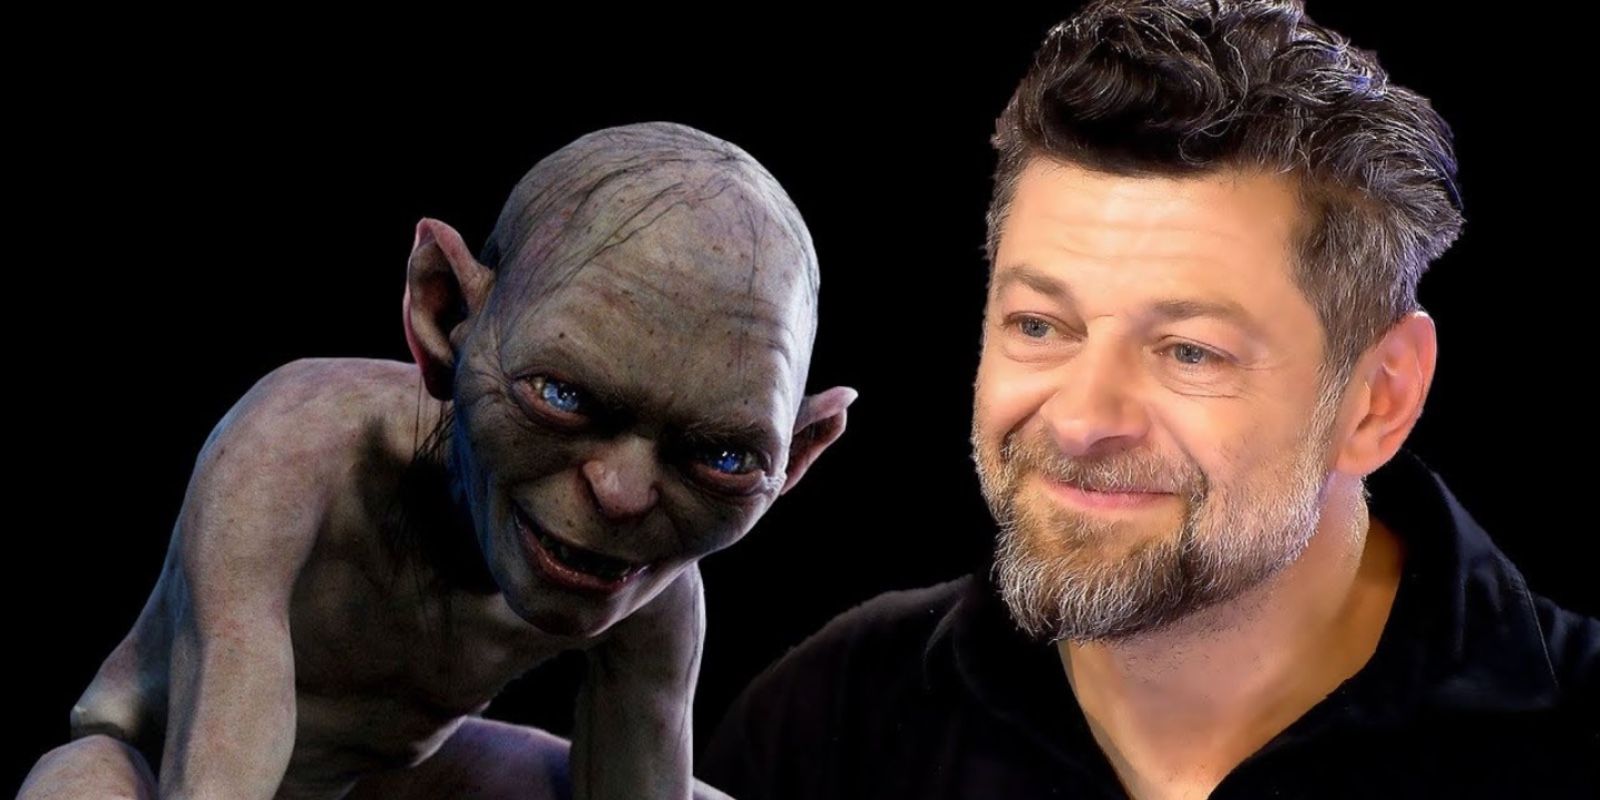 Andy Serkis on Finding Gollum's Voice 